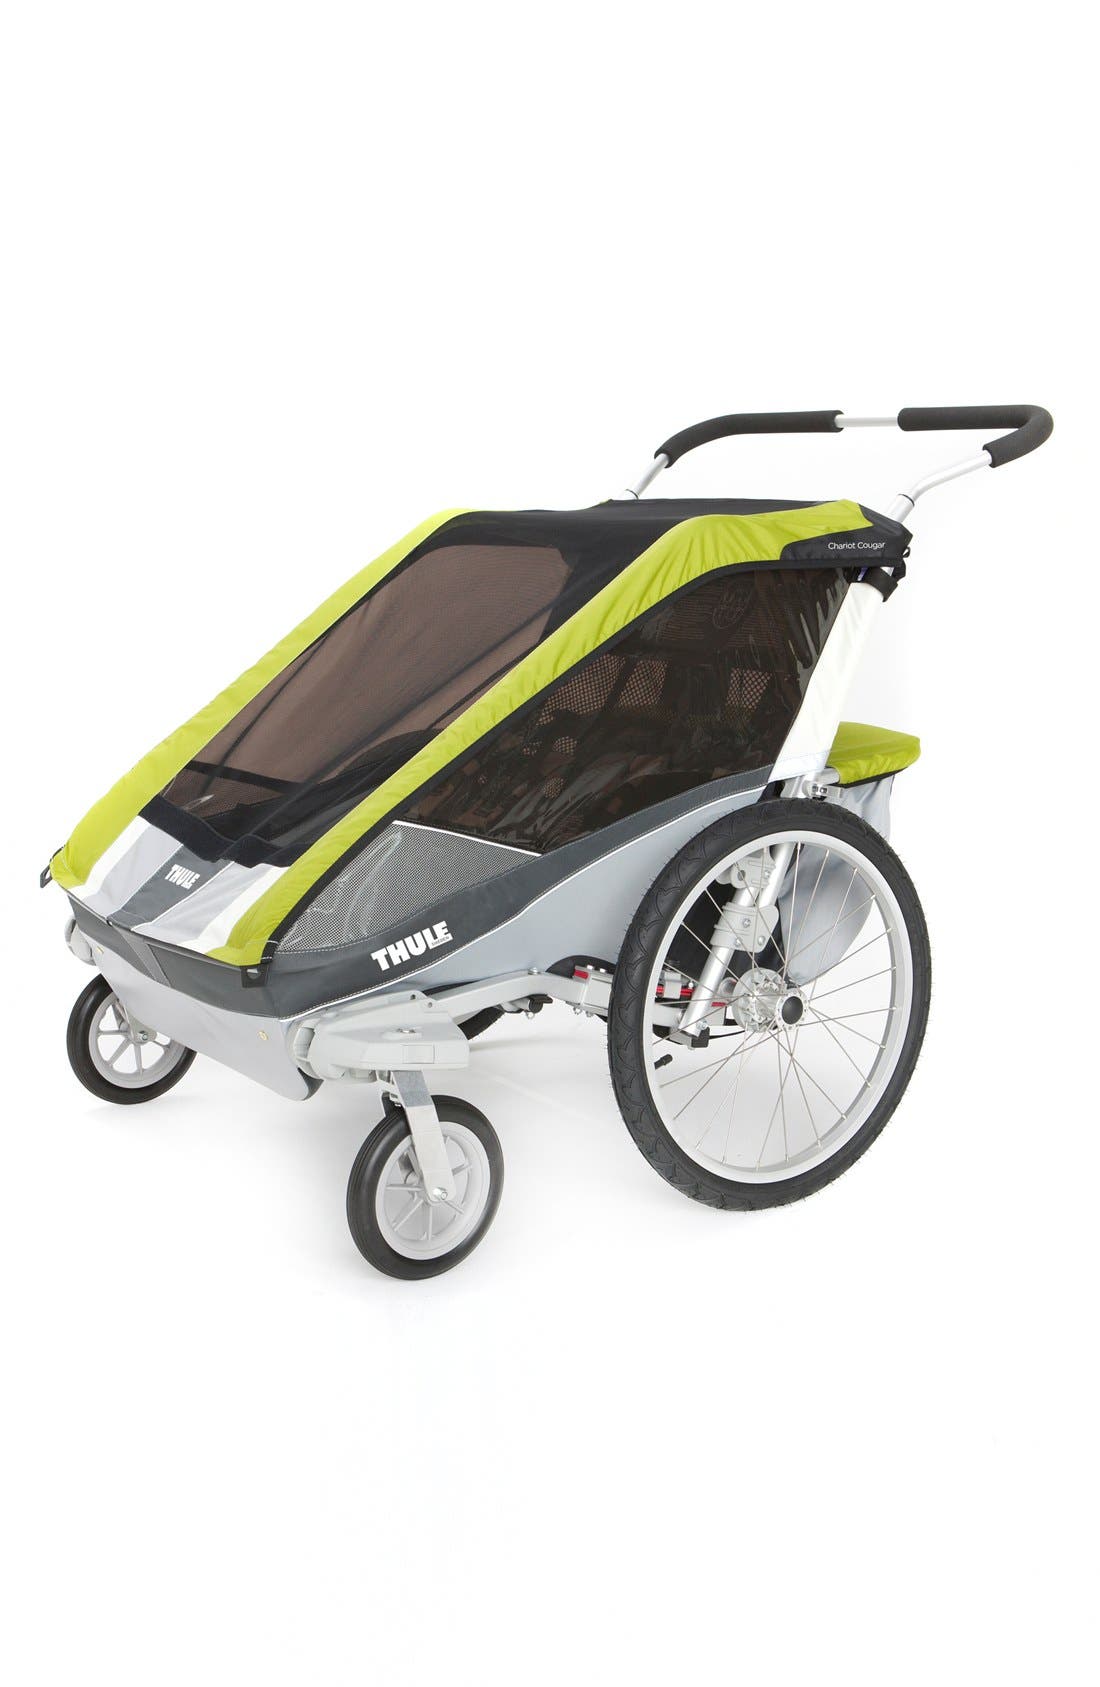 thule chariot cougar 2 strolling kit